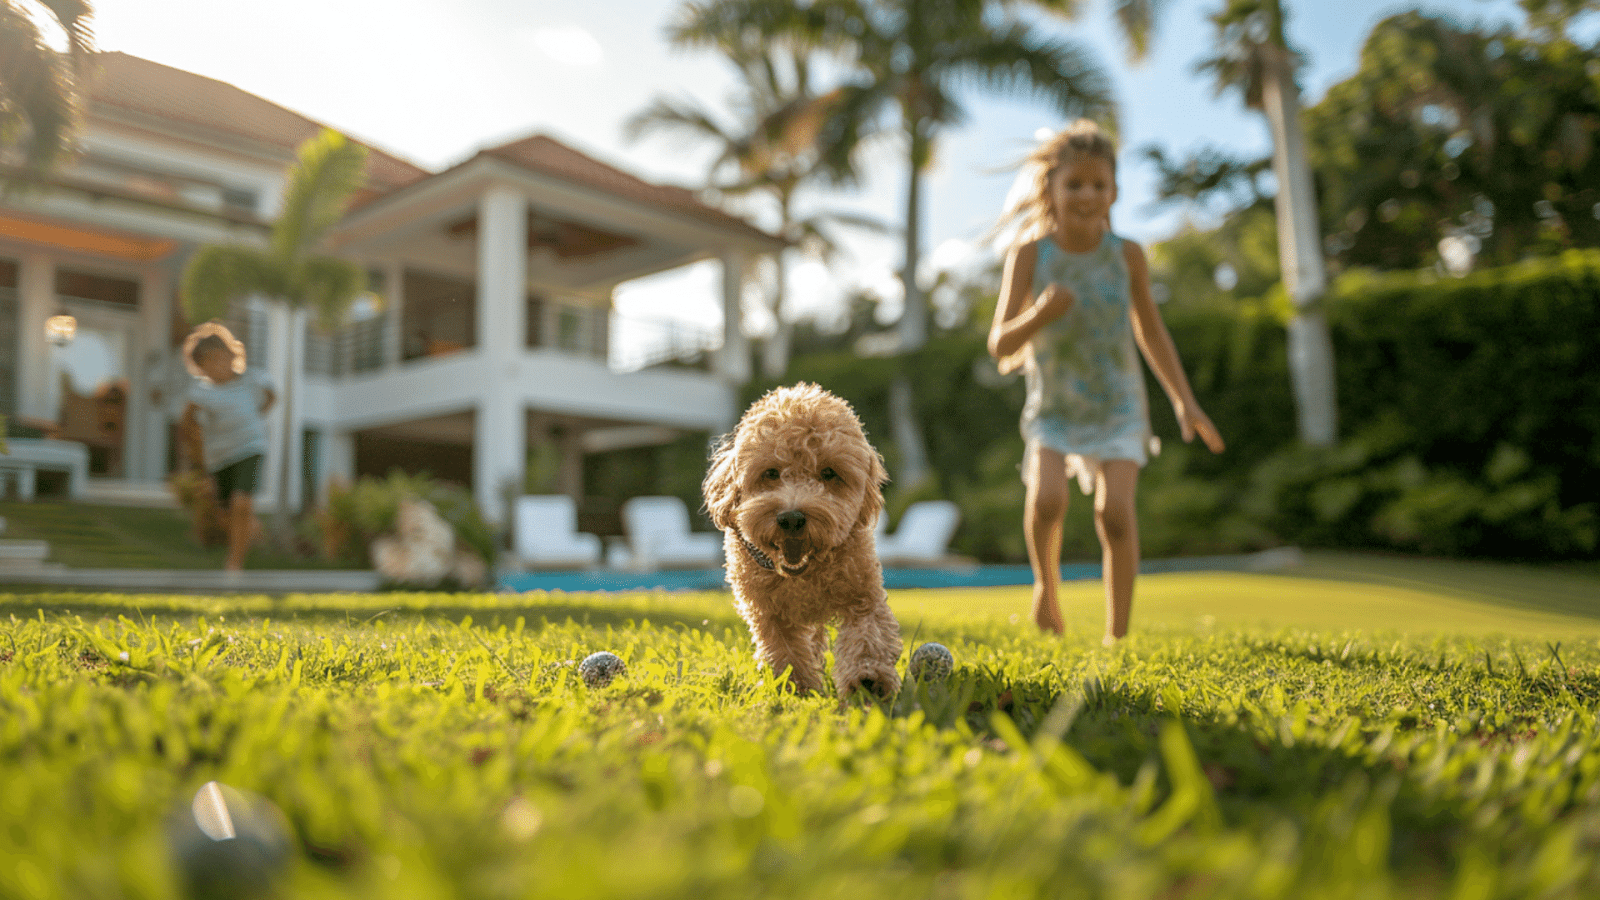 Children and their pet enjoying some outdoor fun at a Palmetto Dunes luxury vacation rental